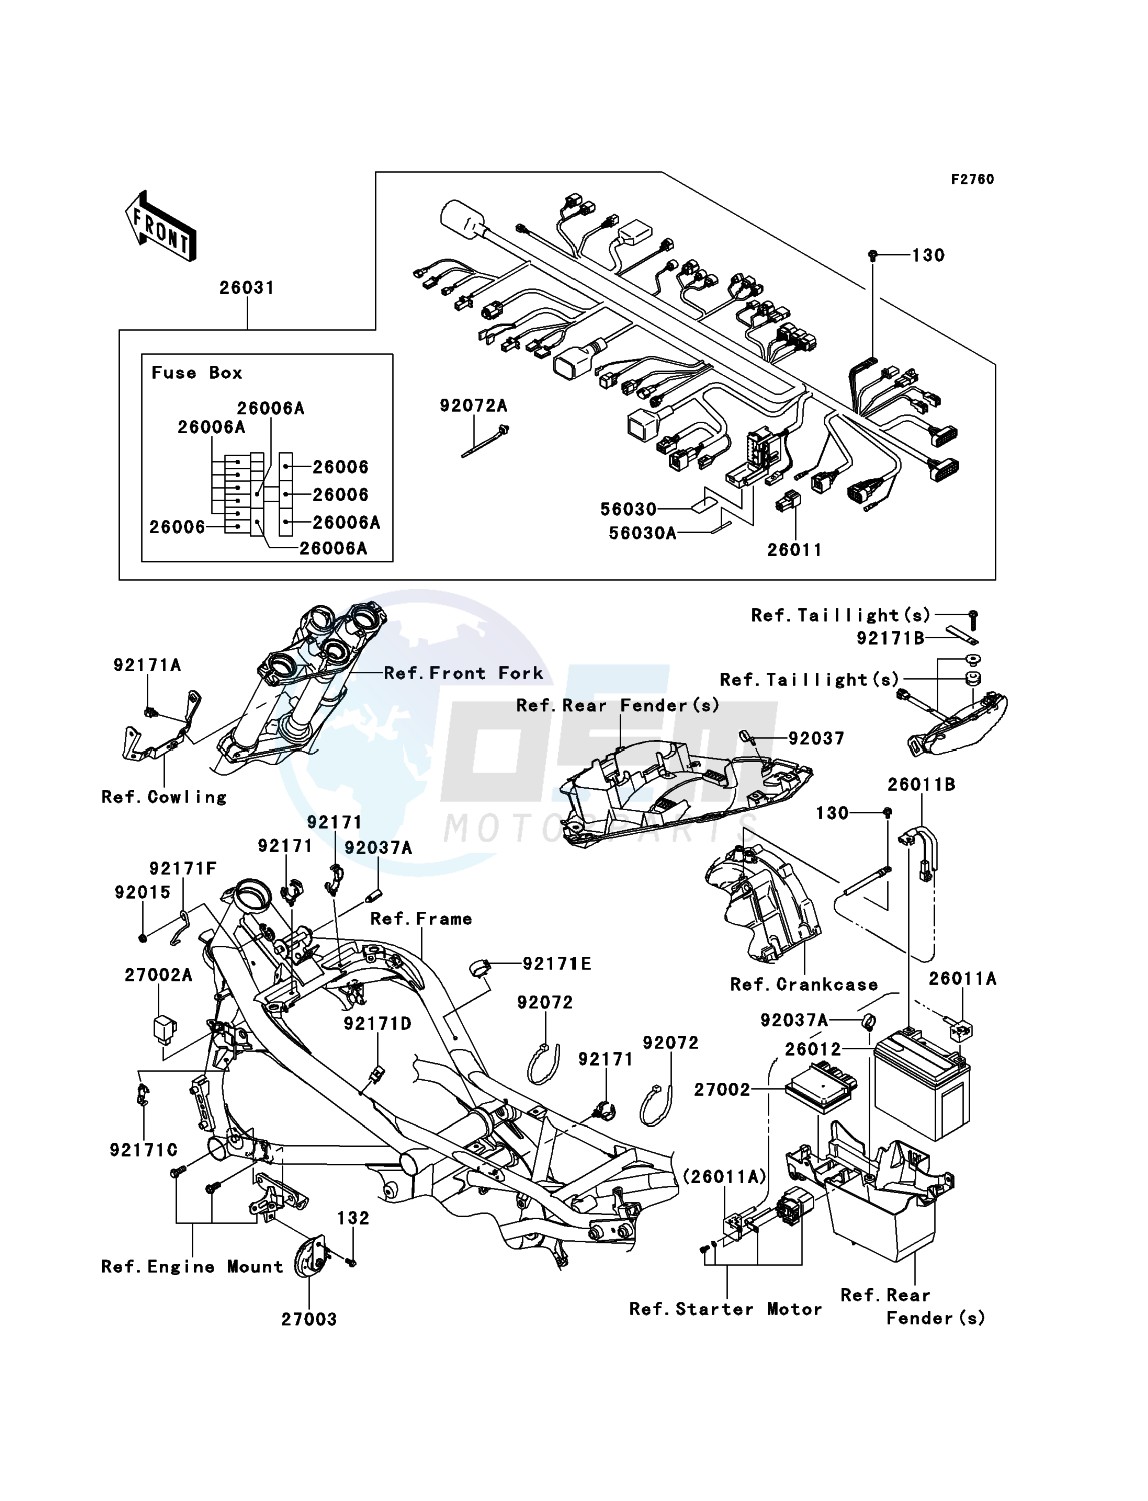 Chassis Electrical Equipment blueprint